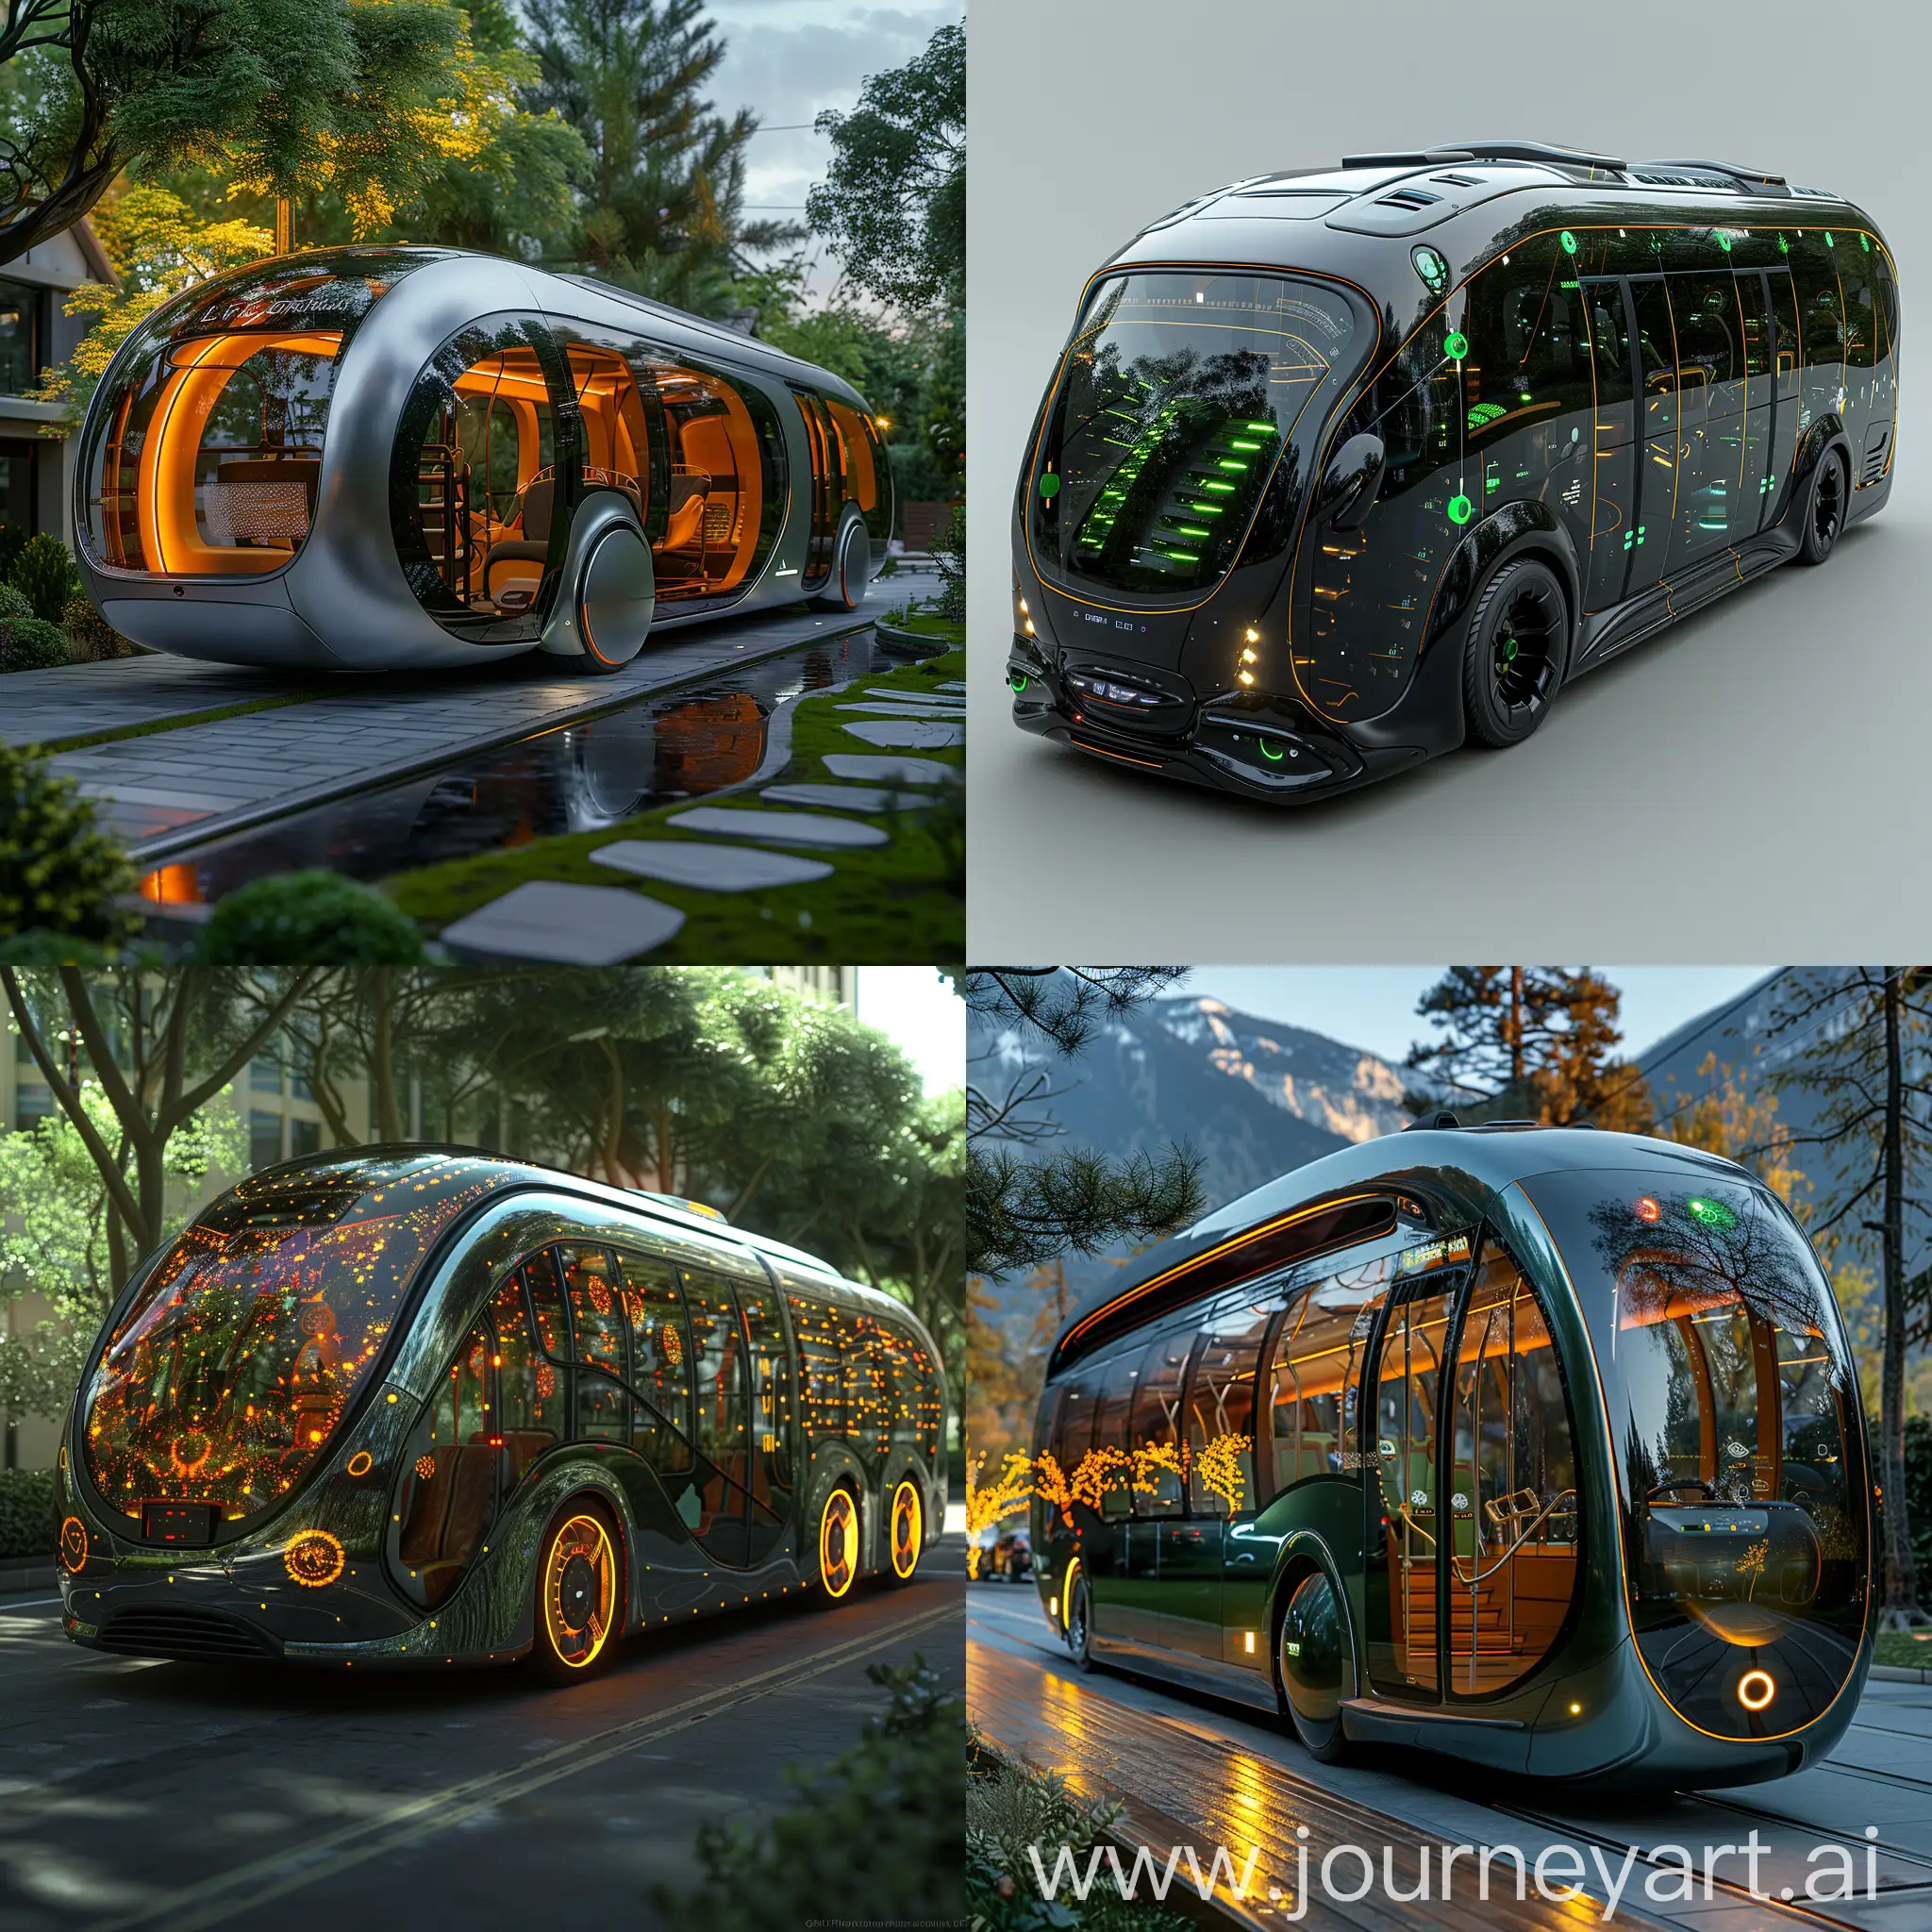 Futuristic-Electric-Bus-with-Solar-Panels-and-Nanotechnology-Features